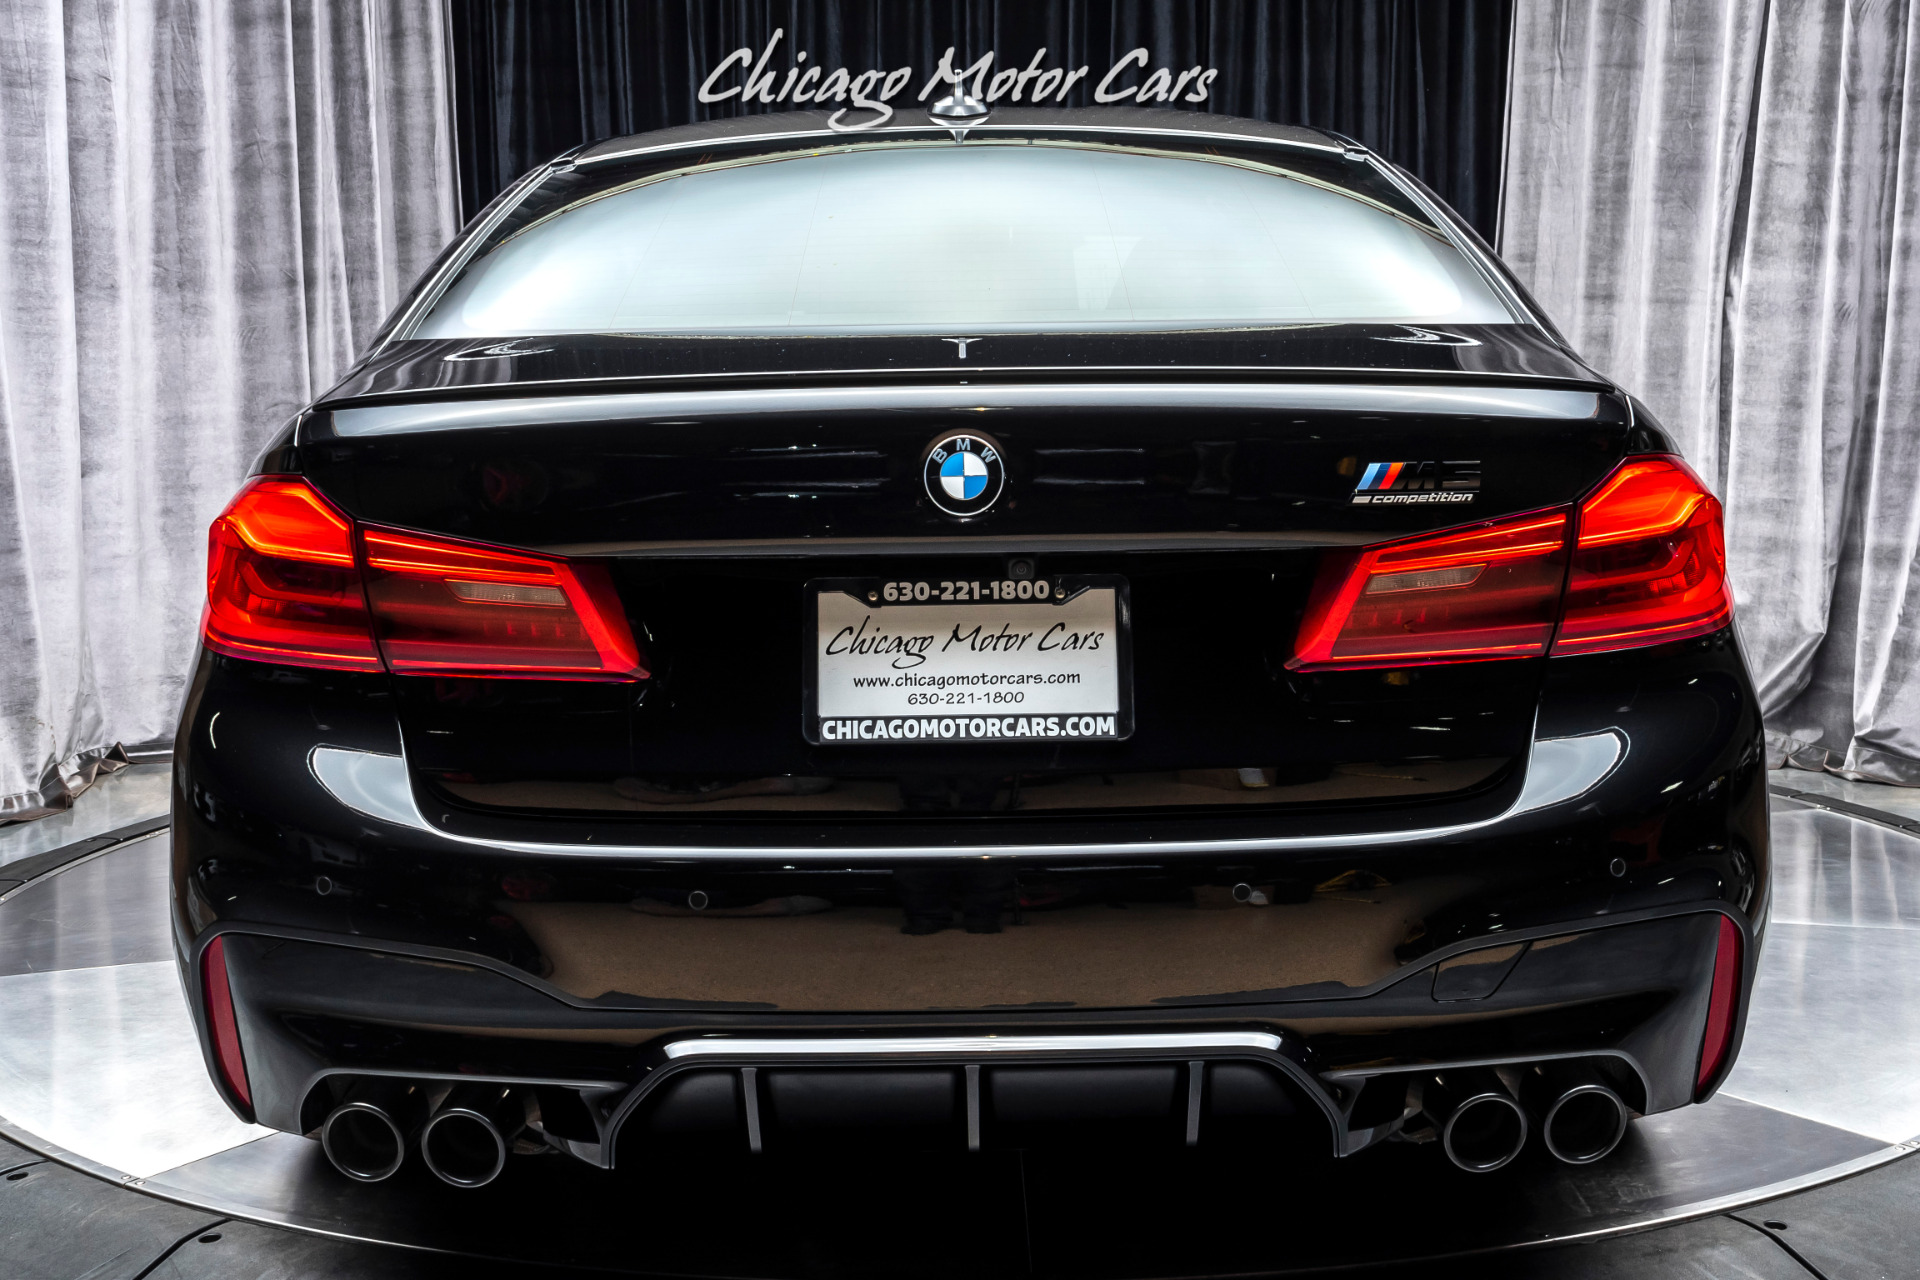 Used-2019-BMW-M5-Competition-Sedan-FASTEST-PRODUCTION-BMW-EVER-ONLY-2K-MILES